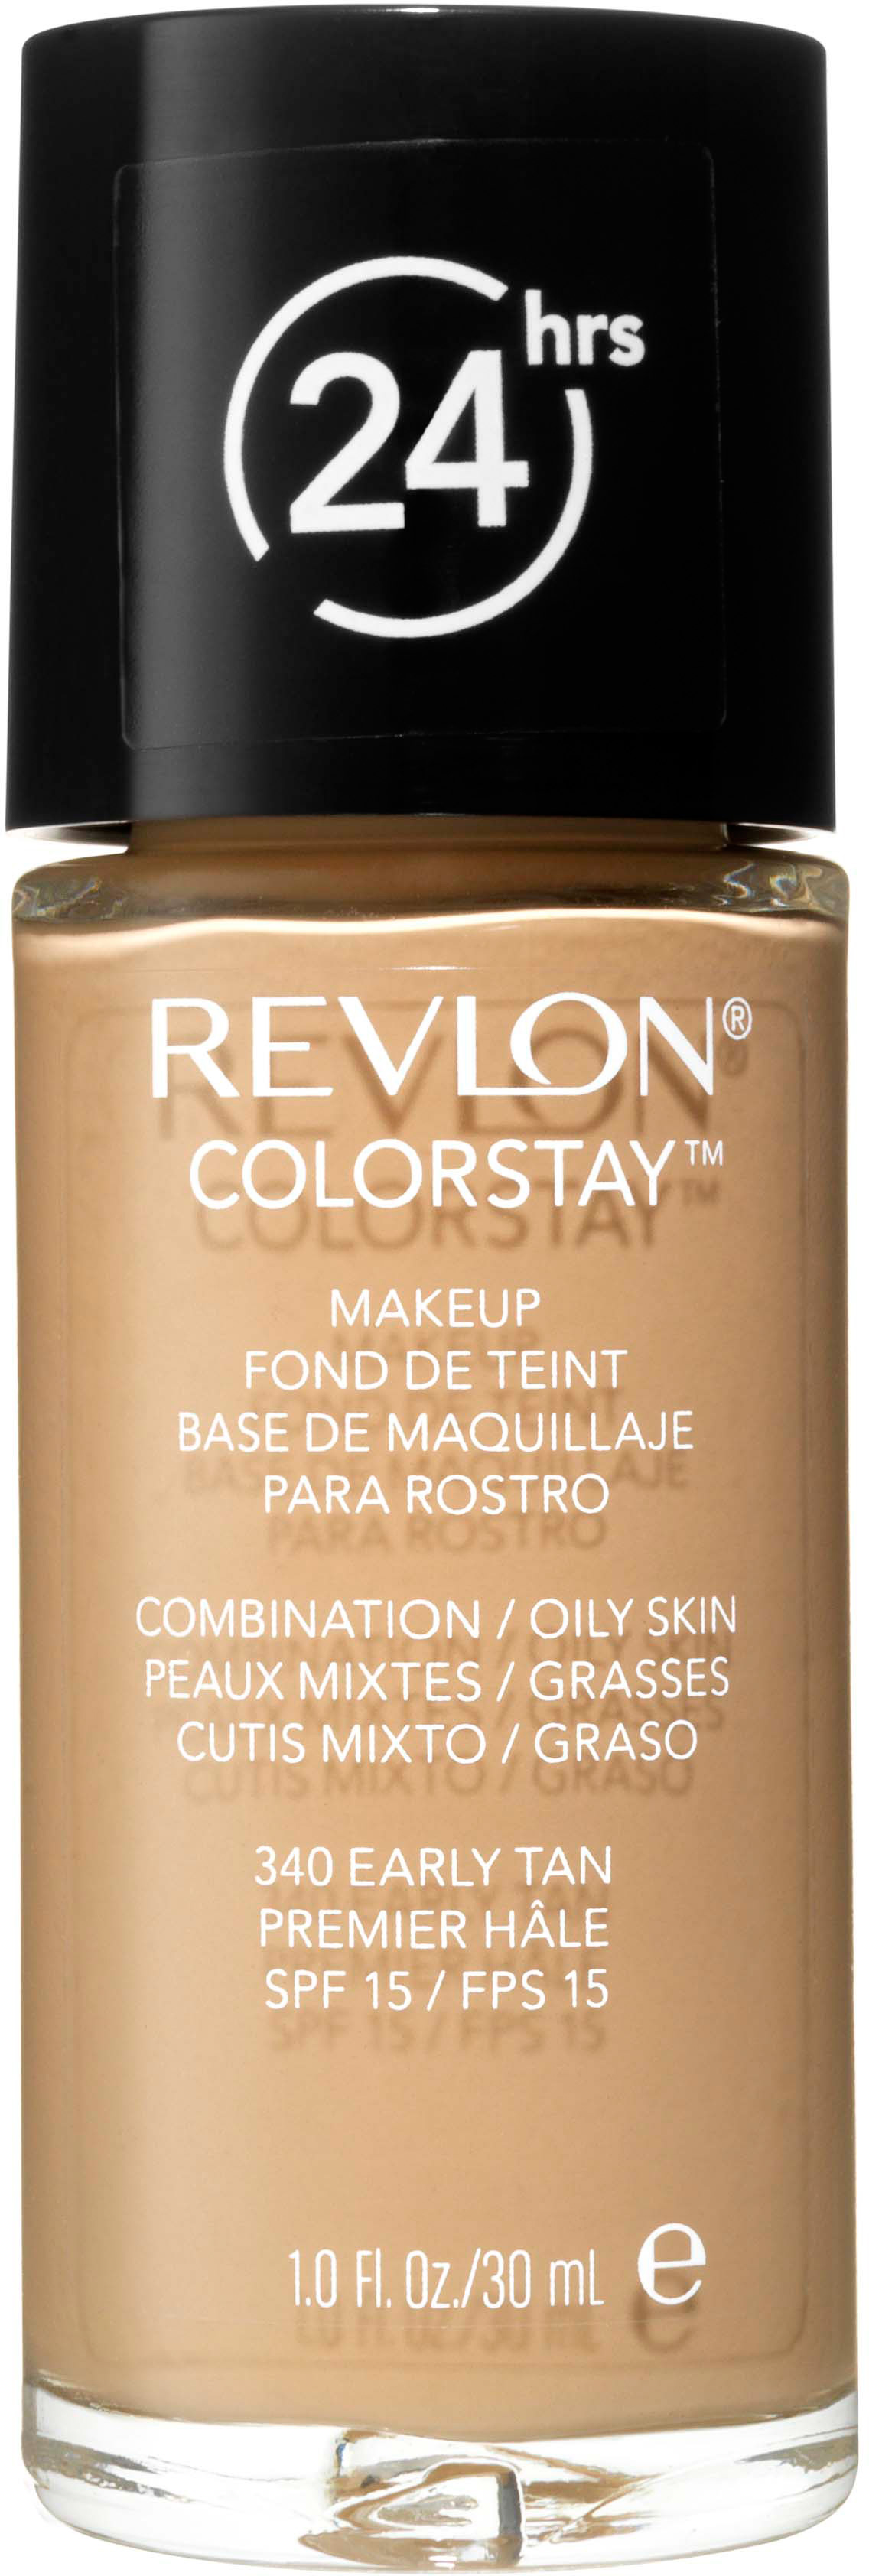 Revlon Cosmetics Colorstay Foundation For Combination/Oily Skin 340